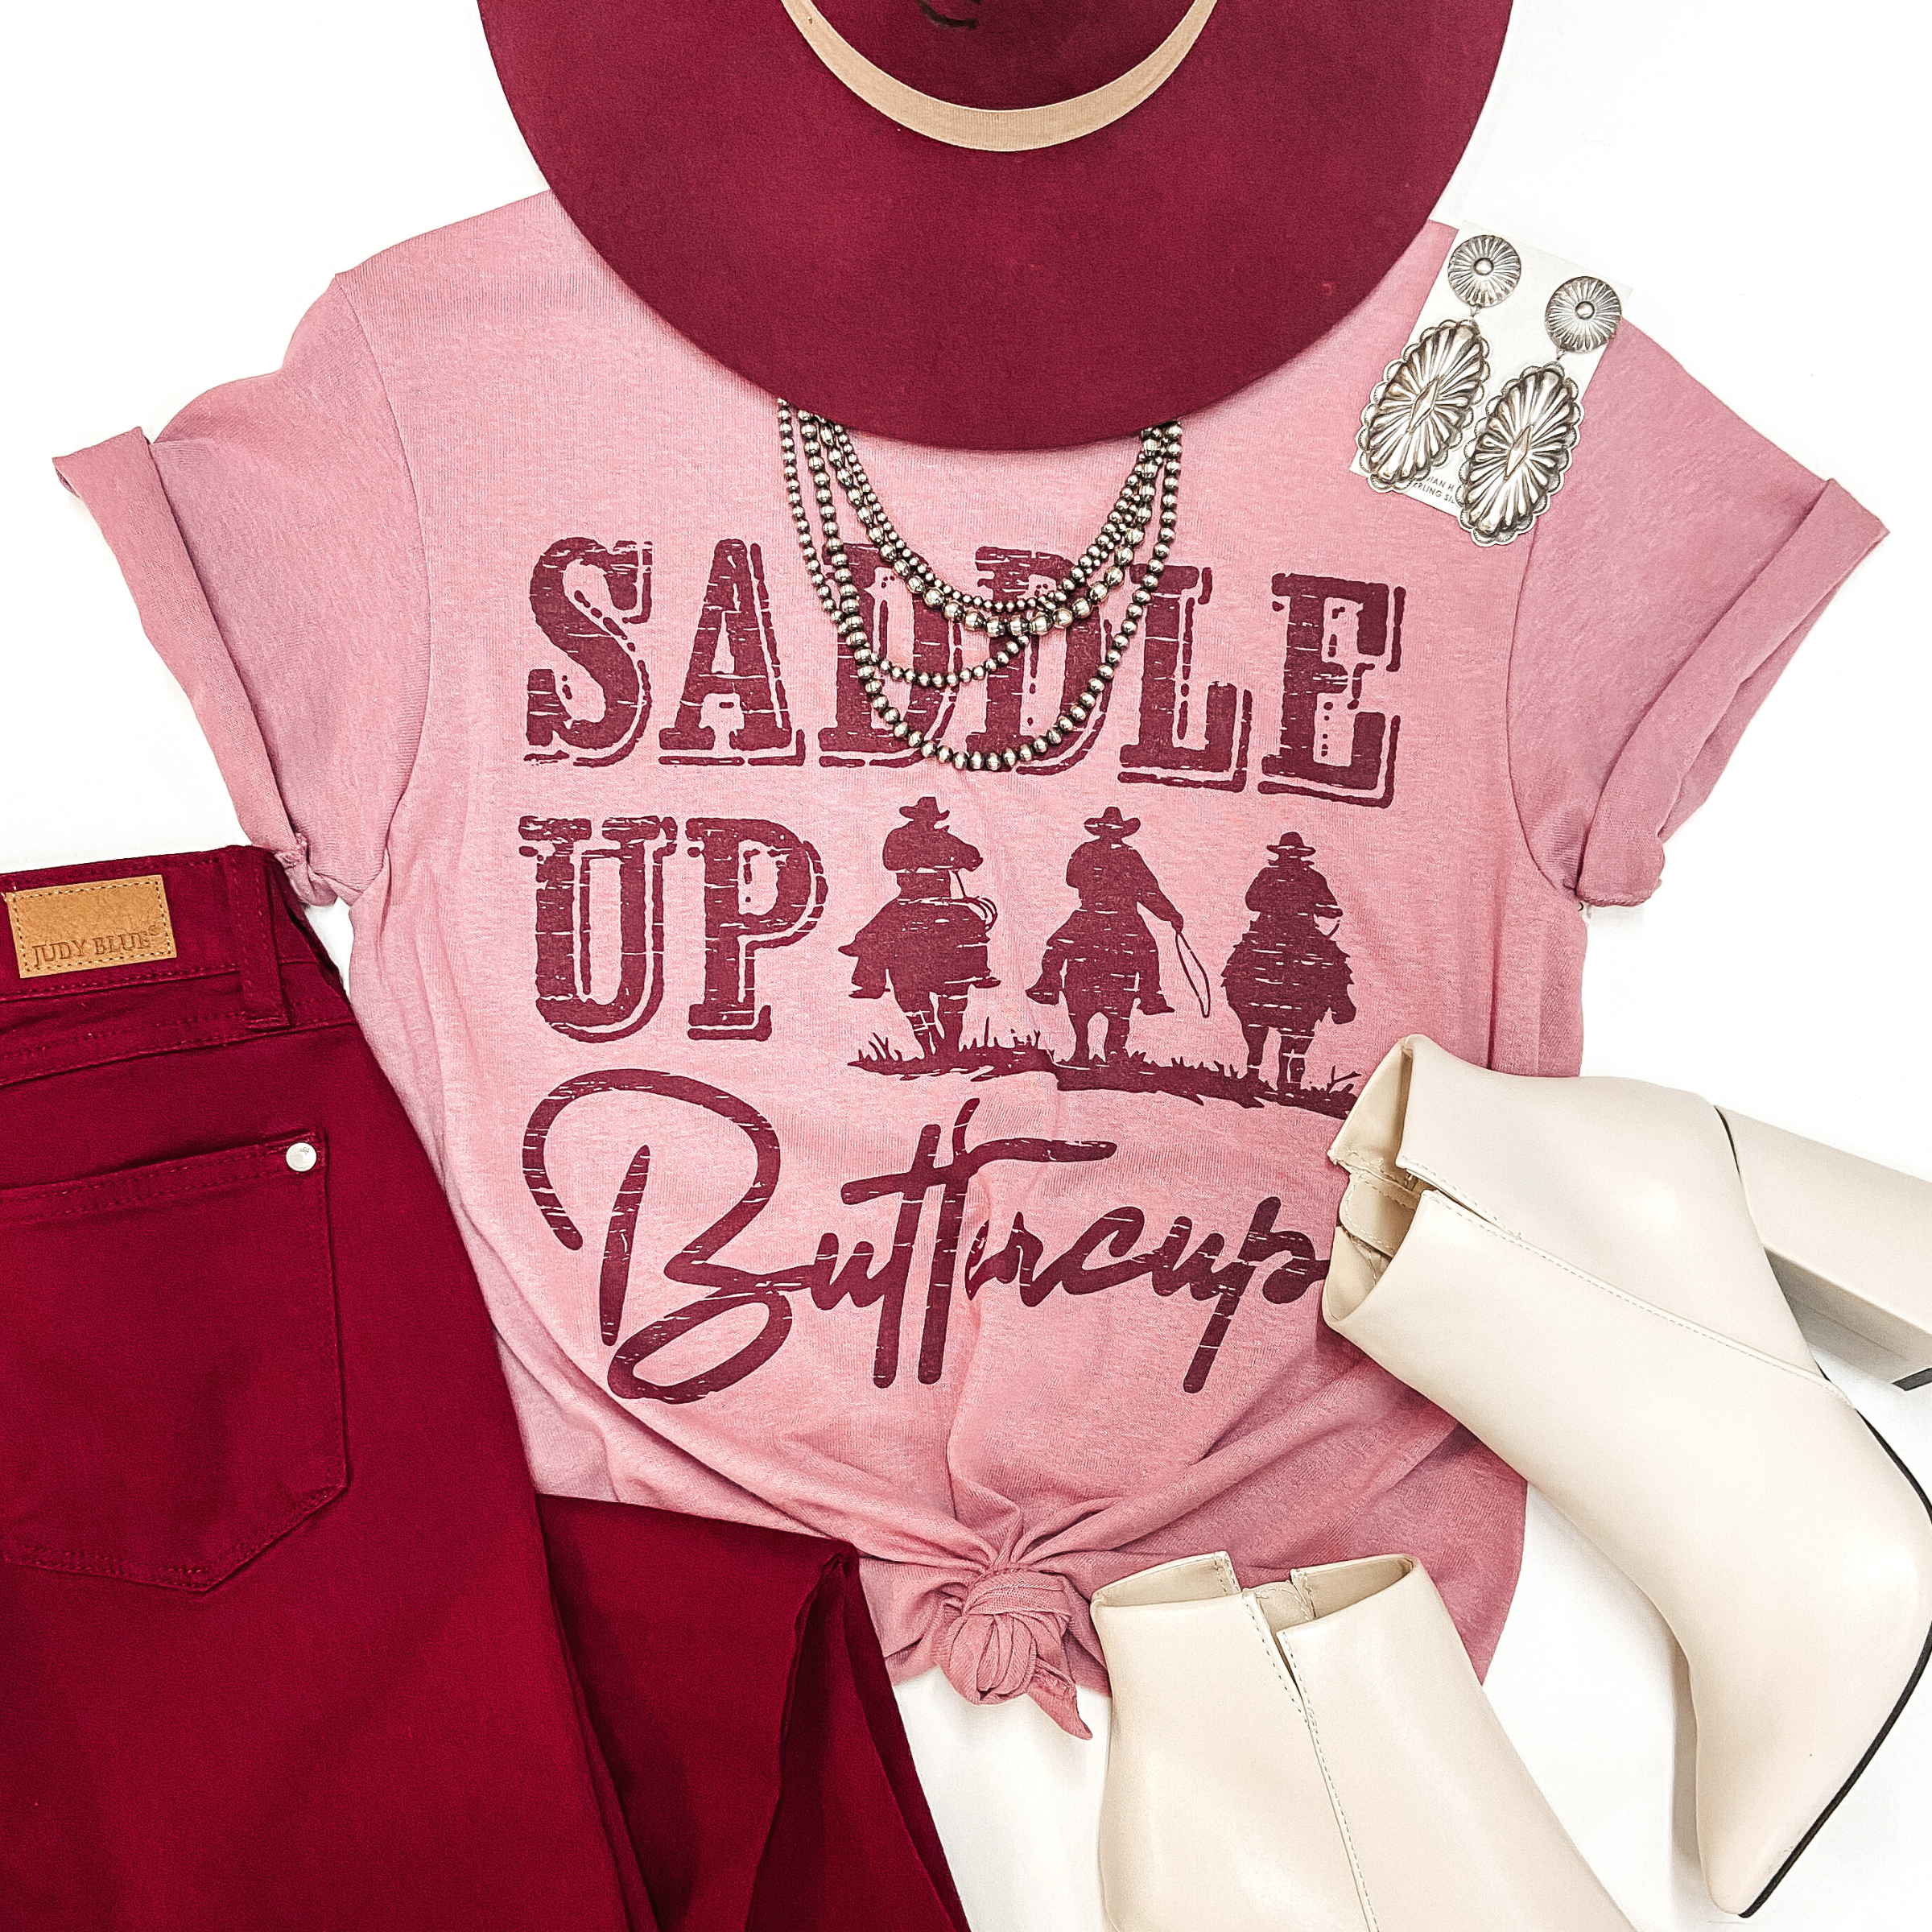 A mauve pink tee shirt with cuffed sleeves and a knotted front. The tee shirt has a maroon graphic of cowboys on horses that says "Saddle Up Buttercup." Pictured on white background with a maroon hat, maroon jeans, and sterling silver jewelry.